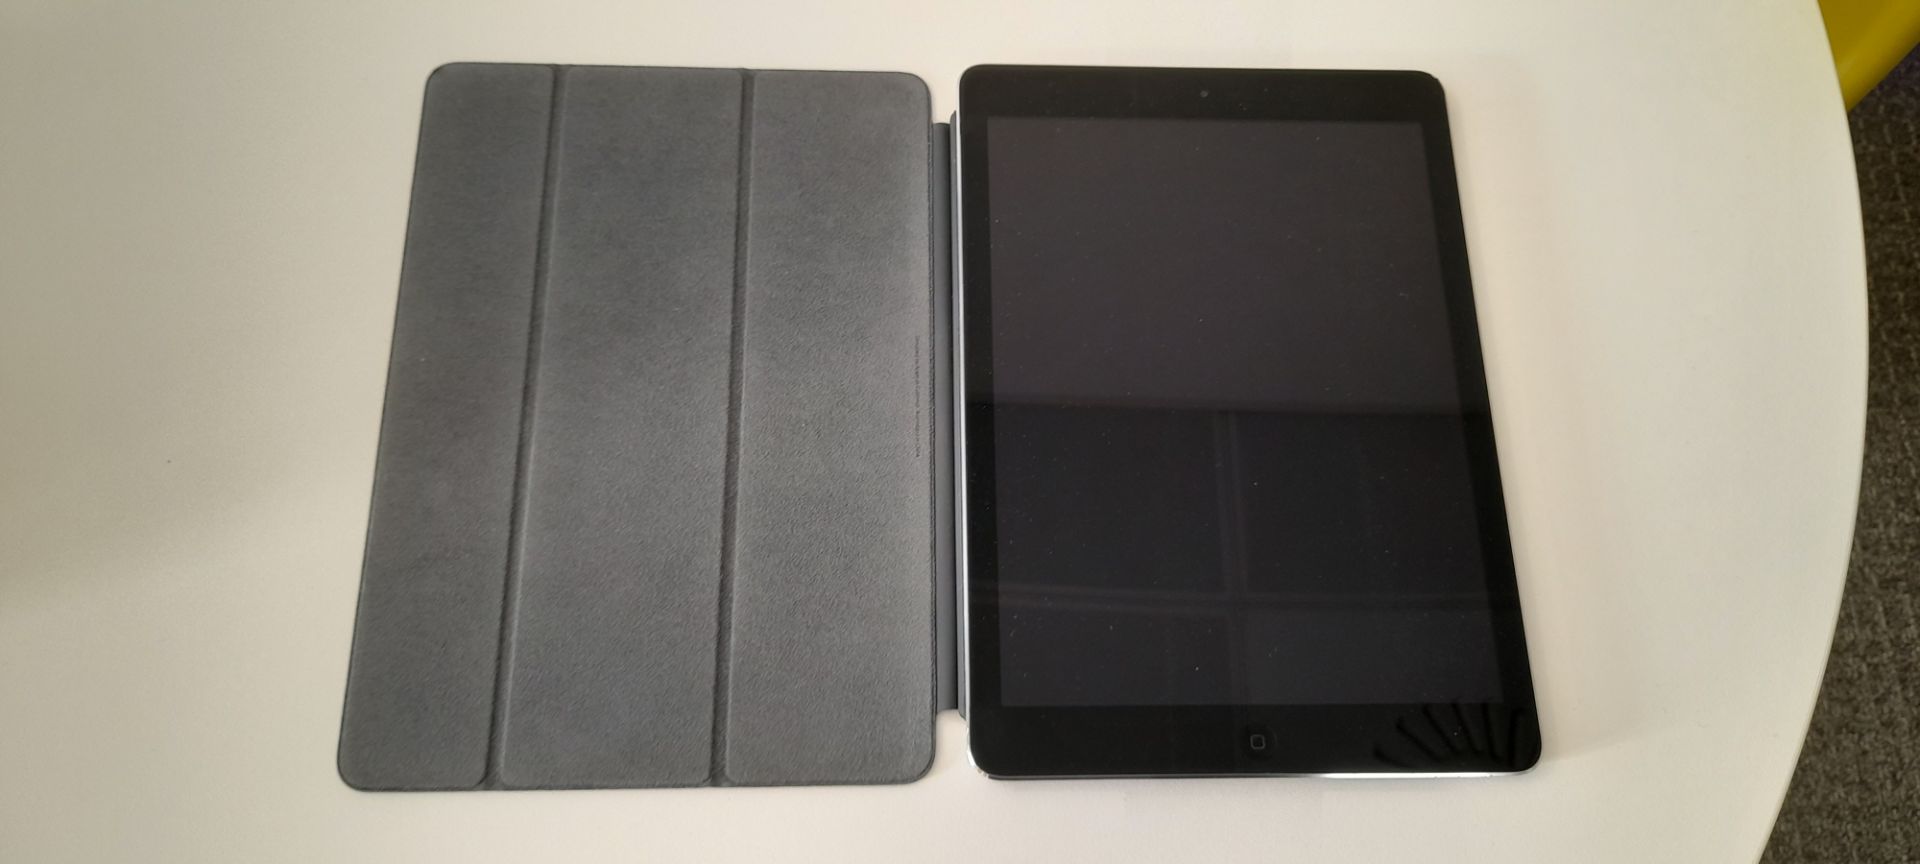 Apple iPad Air, 9.7”. Model A1474, s/n: DMPQL5861FK10 with Apple folding cover. Collection from